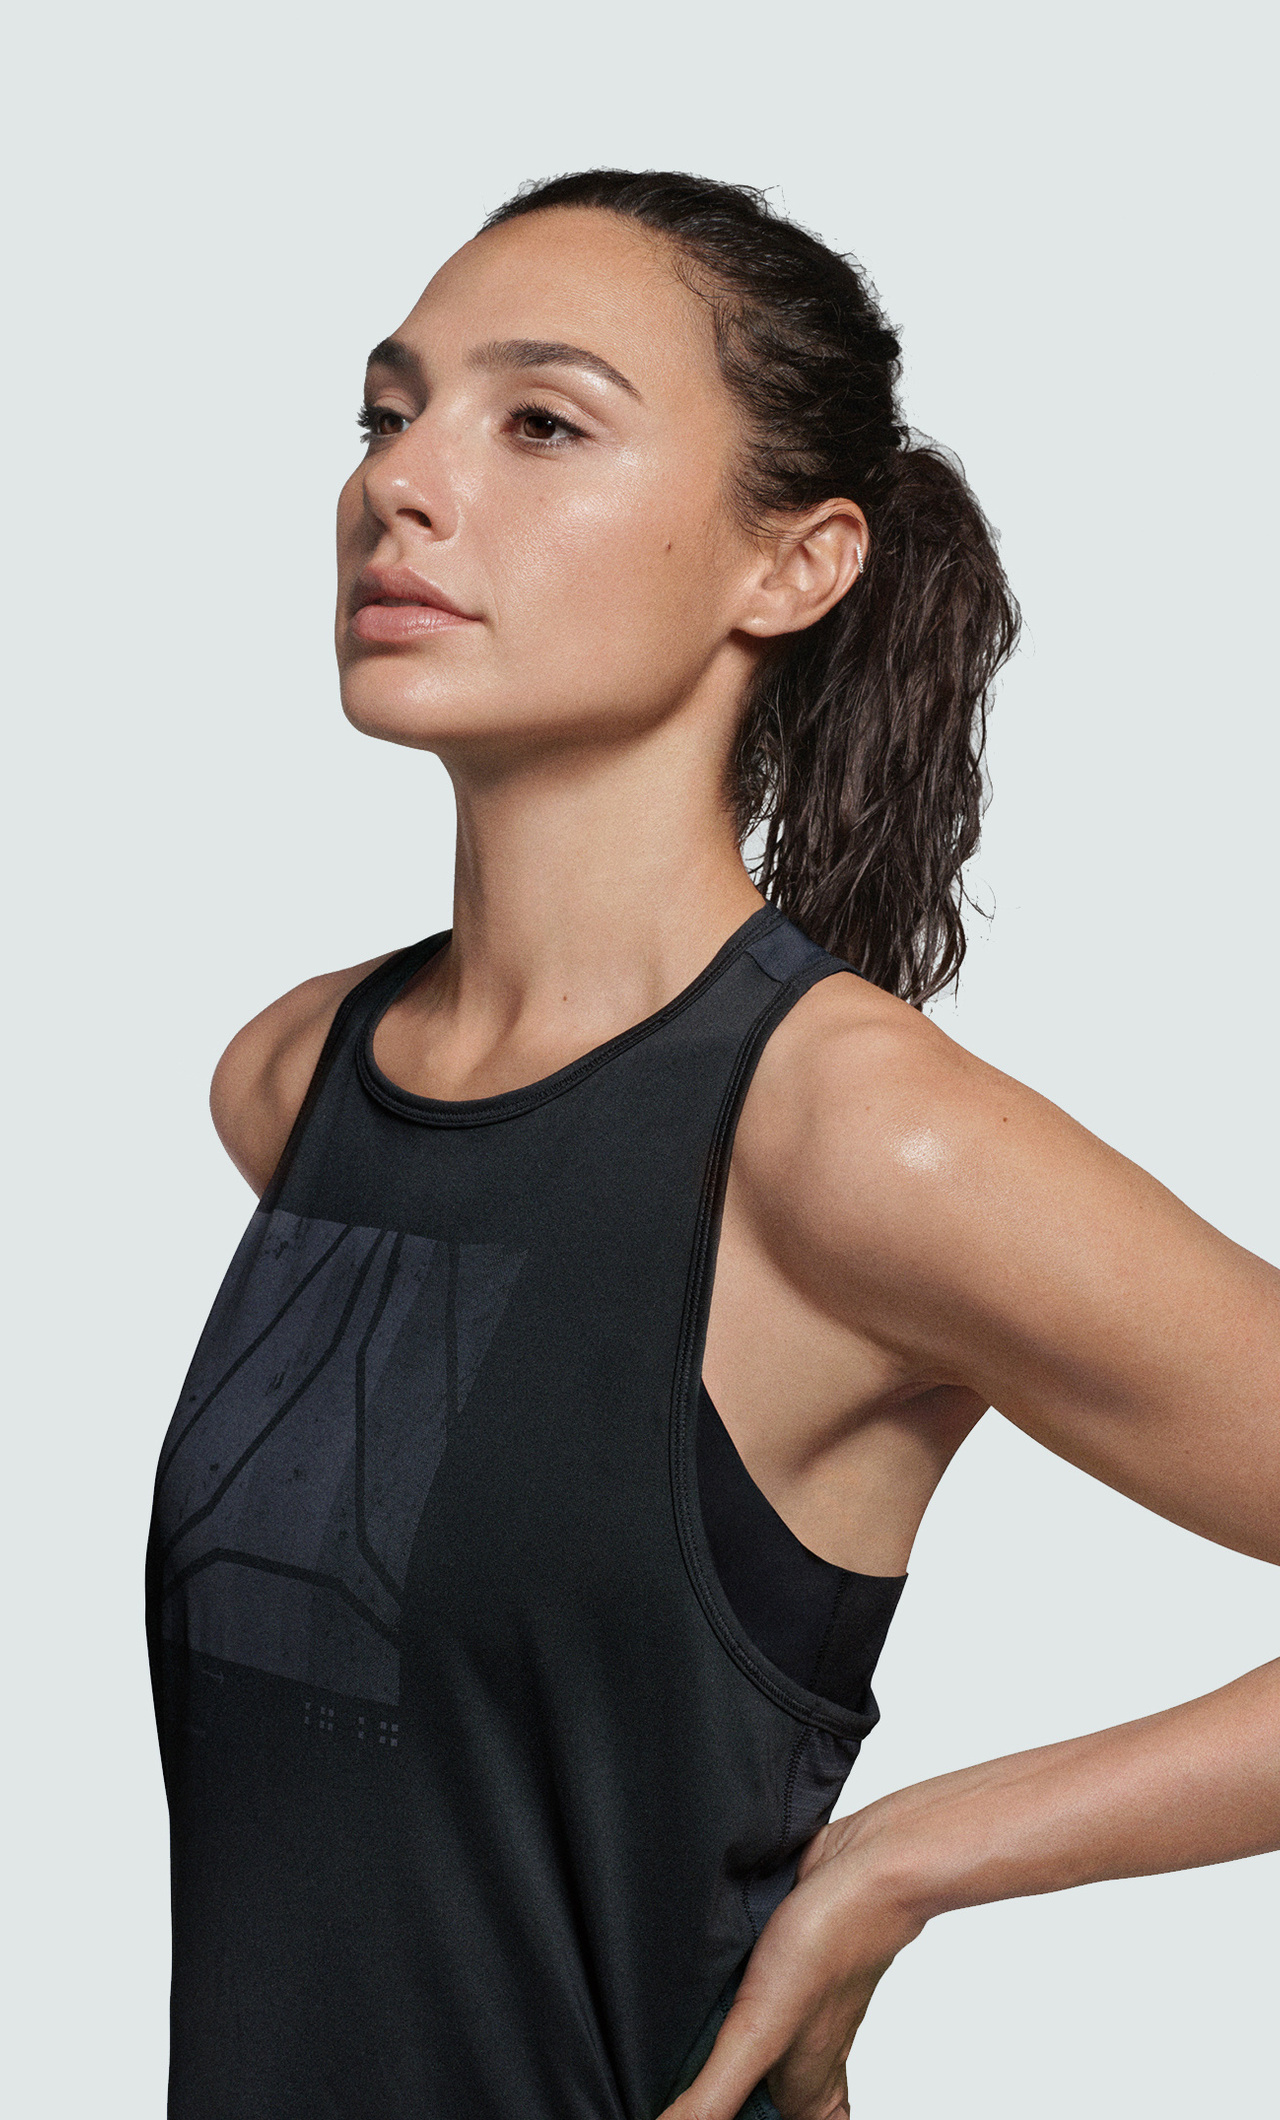 Reebok: The Israeli actress, Gal Gadot, The newest Training Collection, The brand ambassador. 1280x2120 HD Background.